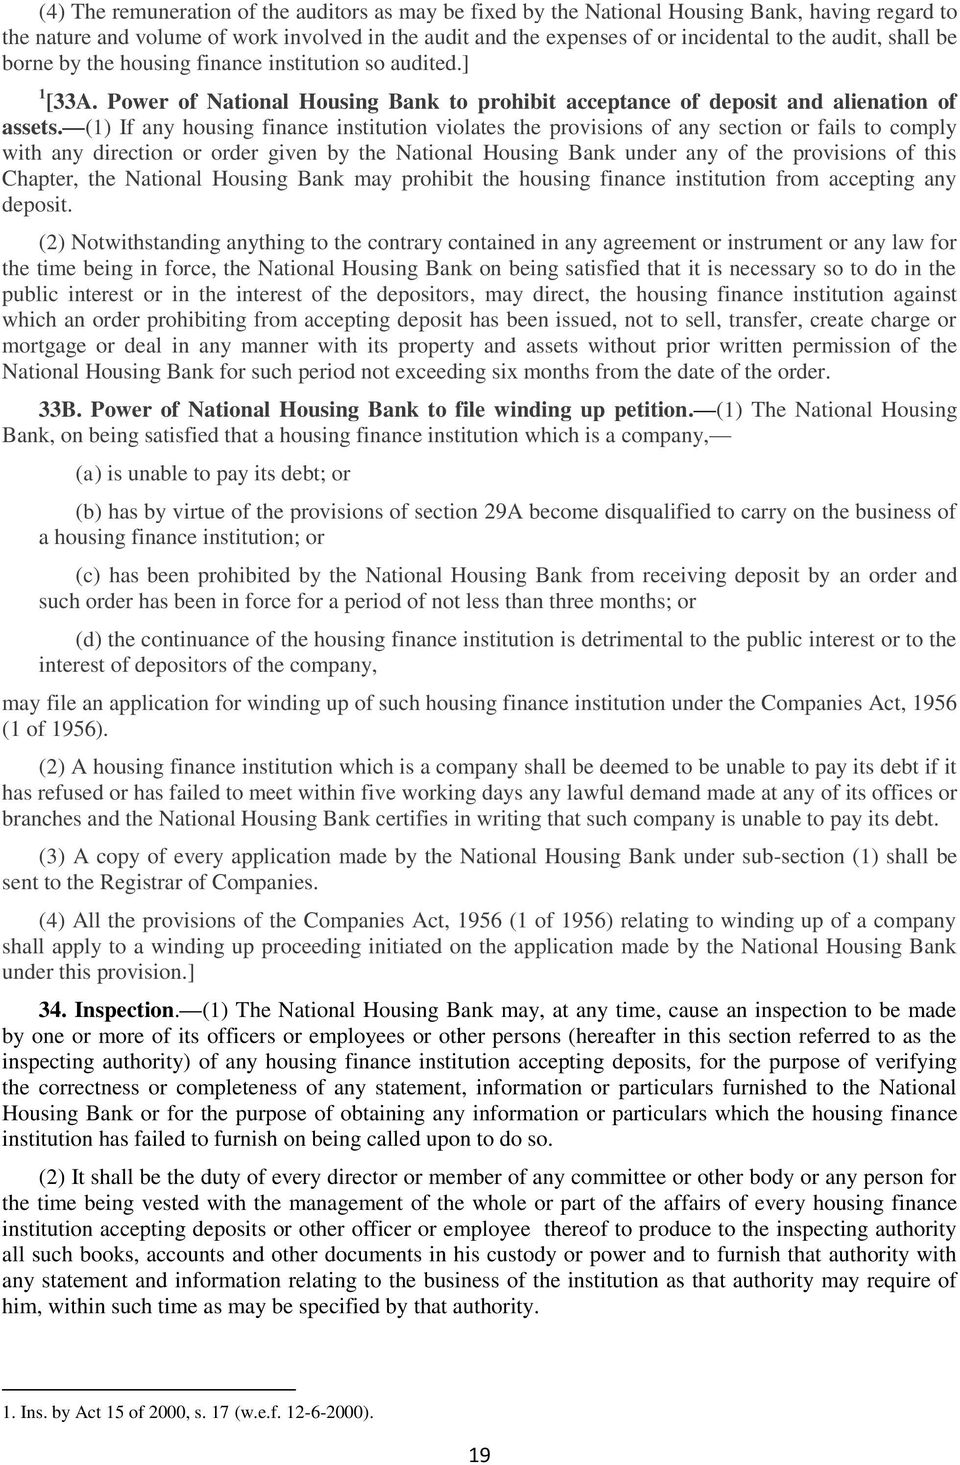 (1) If any housing finance institution violates the provisions of any section or fails to comply with any direction or order given by the National Housing Bank under any of the provisions of this